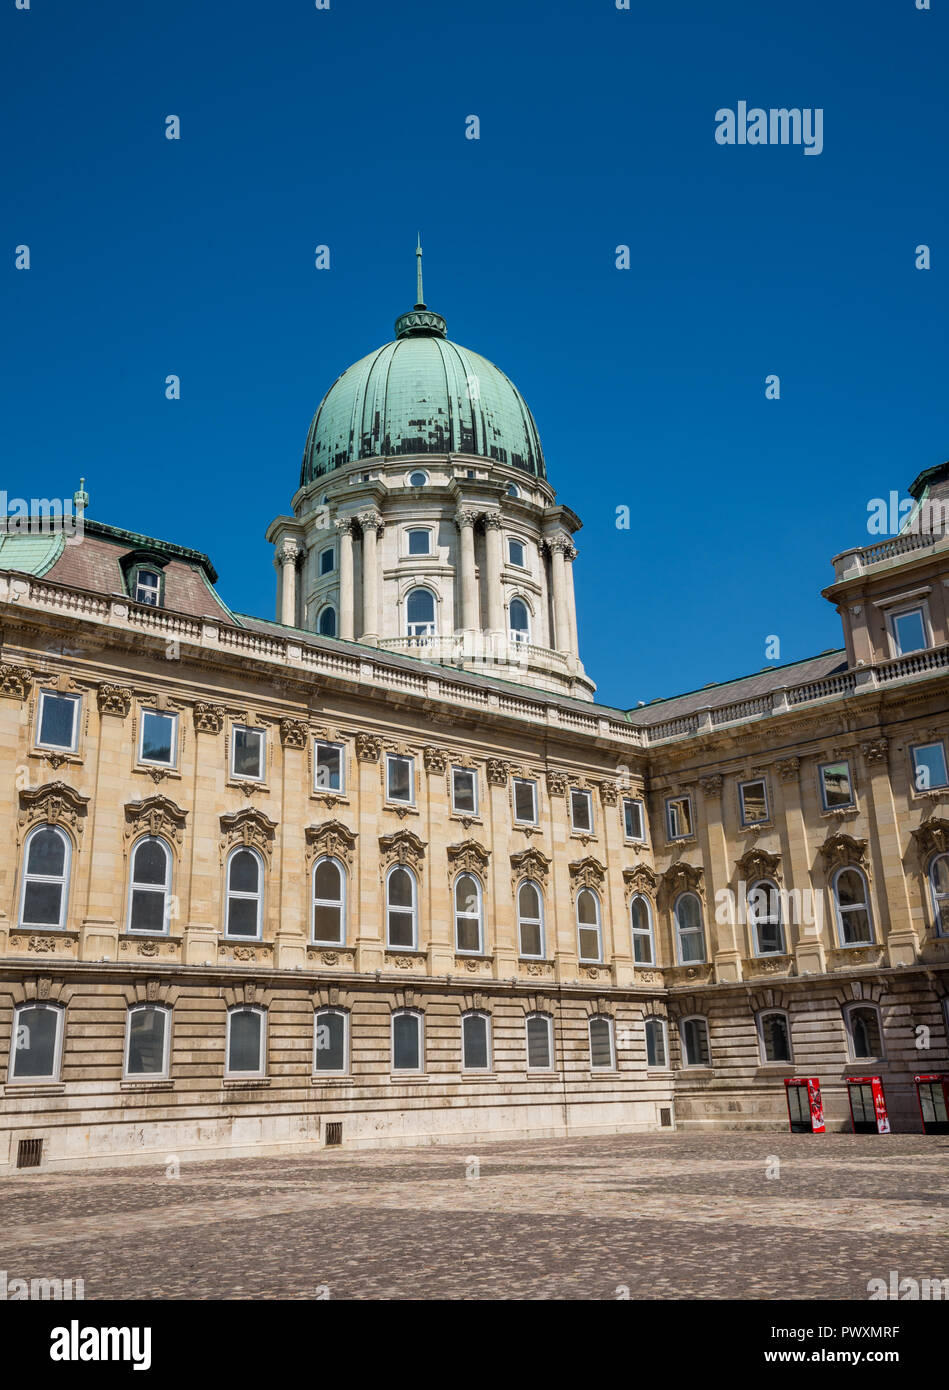 Budapest, Hungary - 7 august 2018: architecture of The Buda Castle History Museum Stock Photo